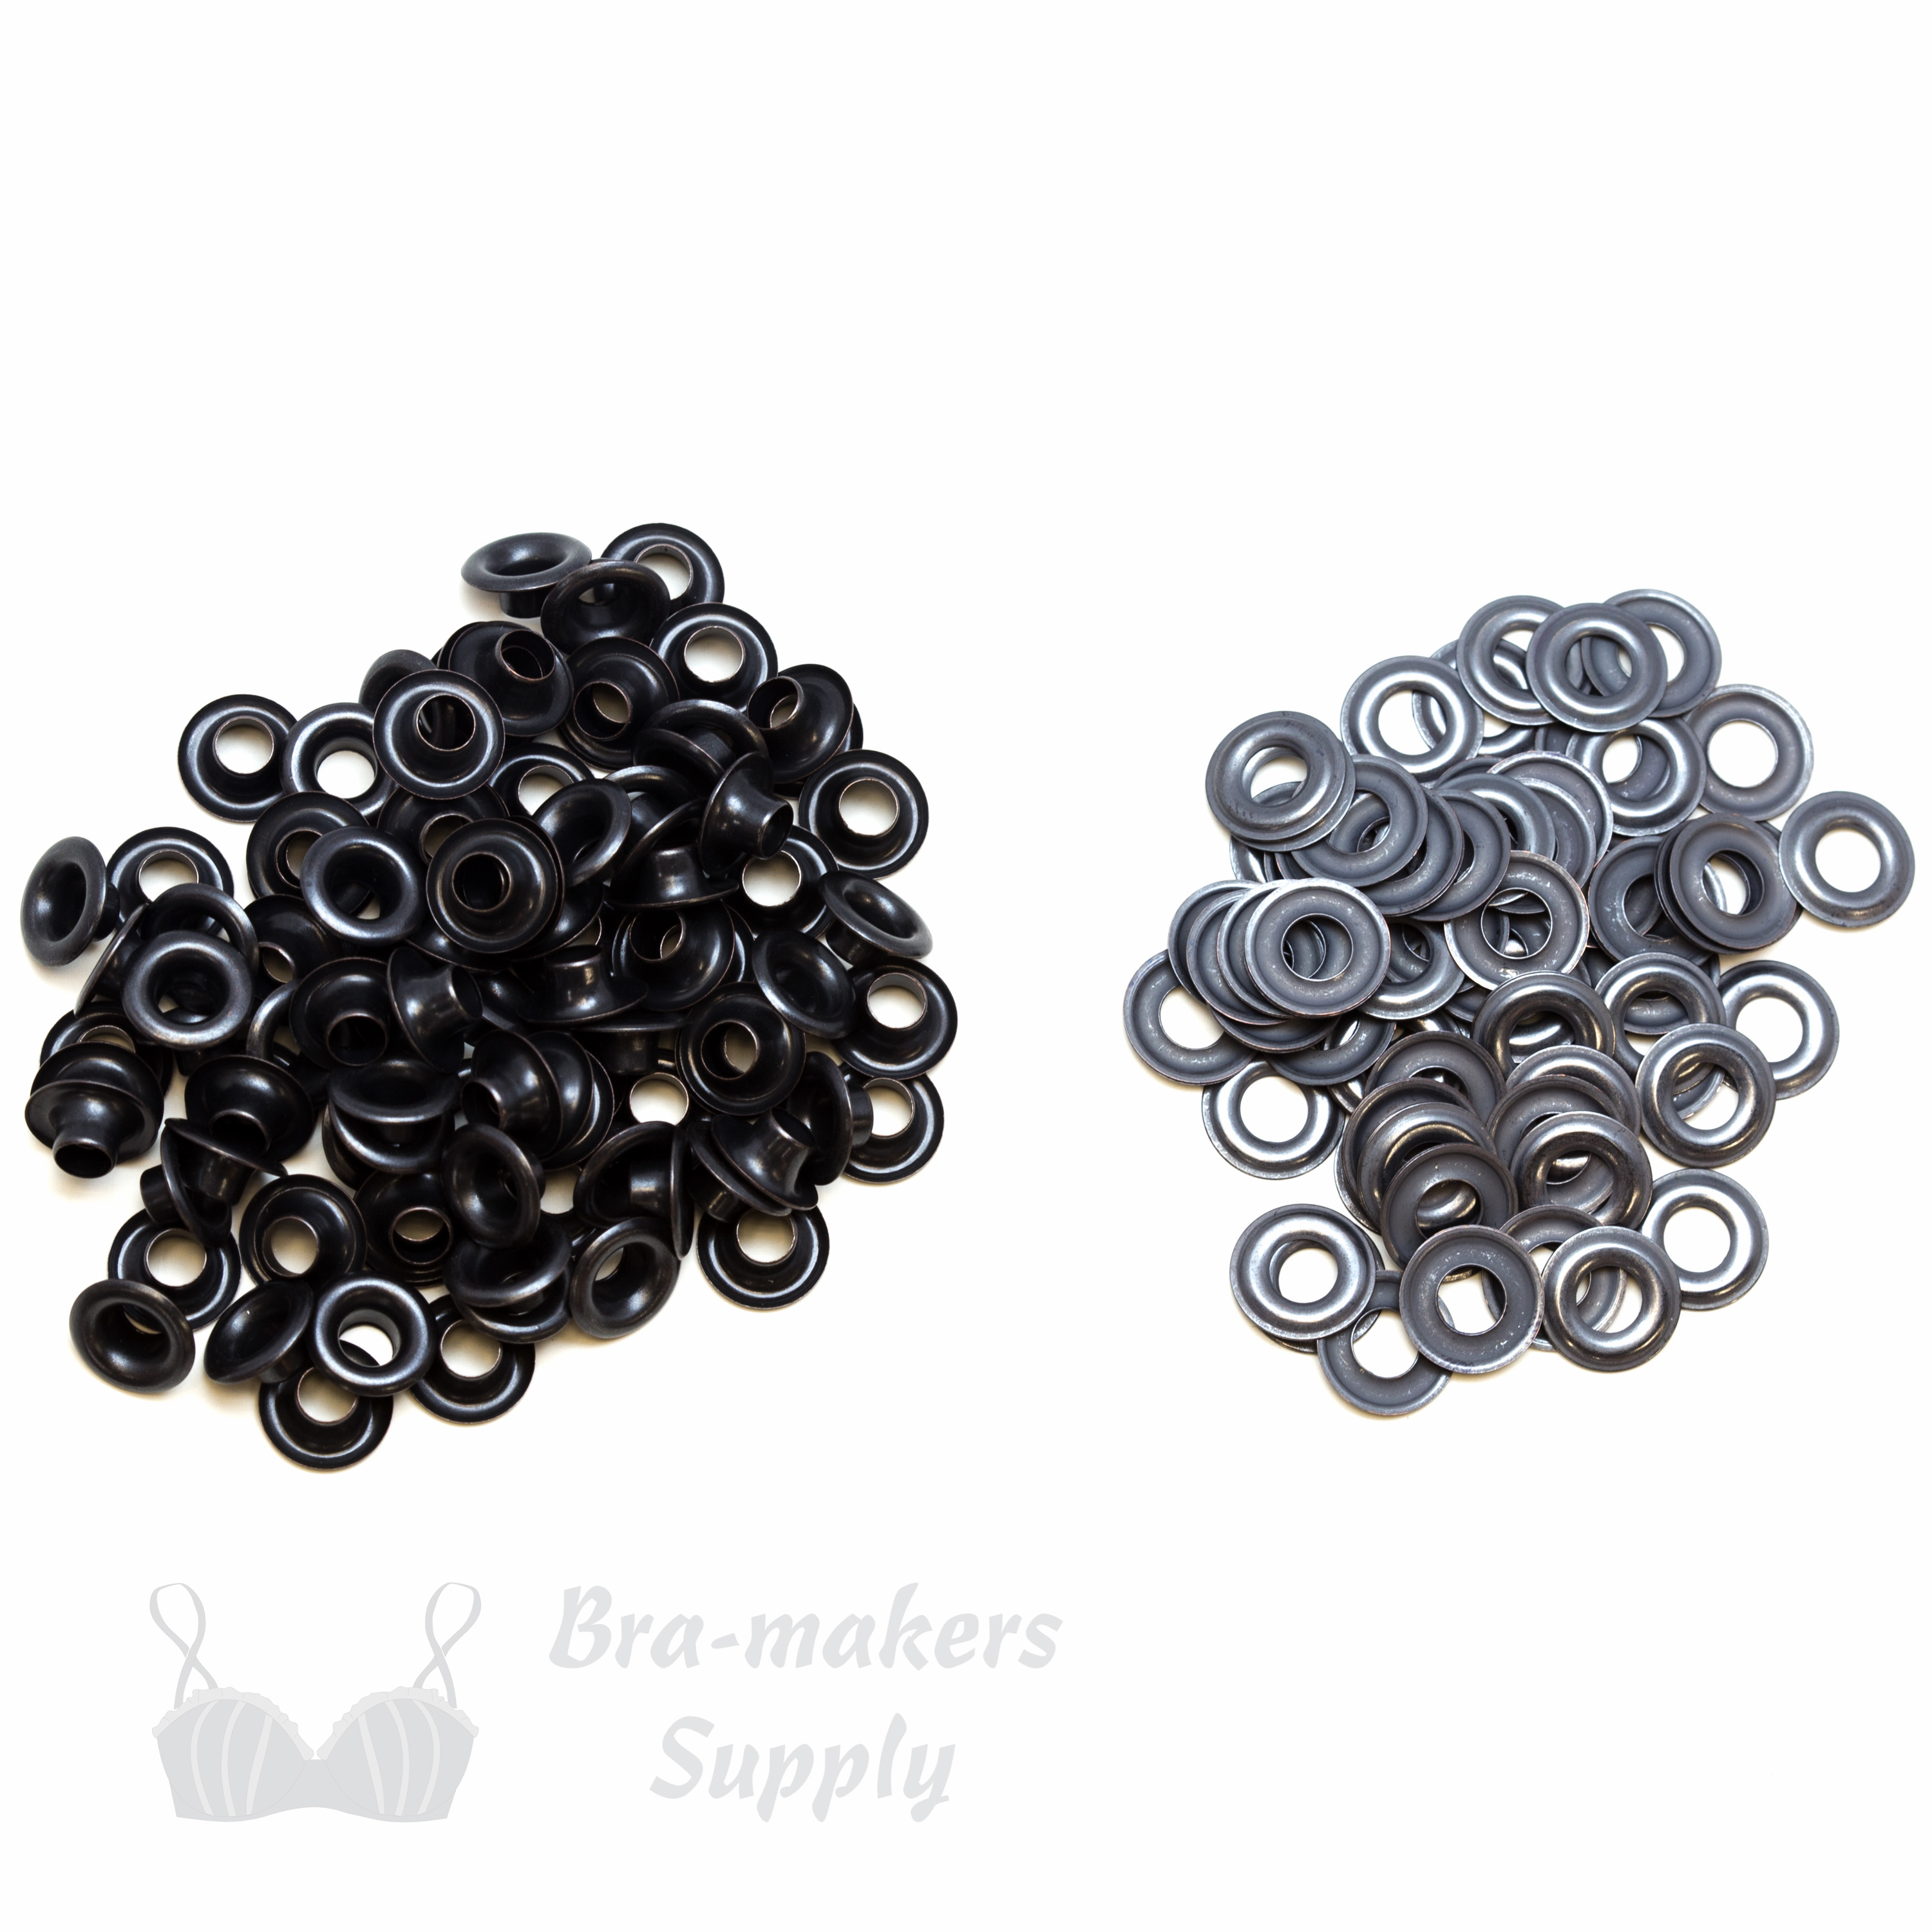 metal corset grommets or two part eyelets BG-00 black from Bra-Makers Supply package of 144 shown